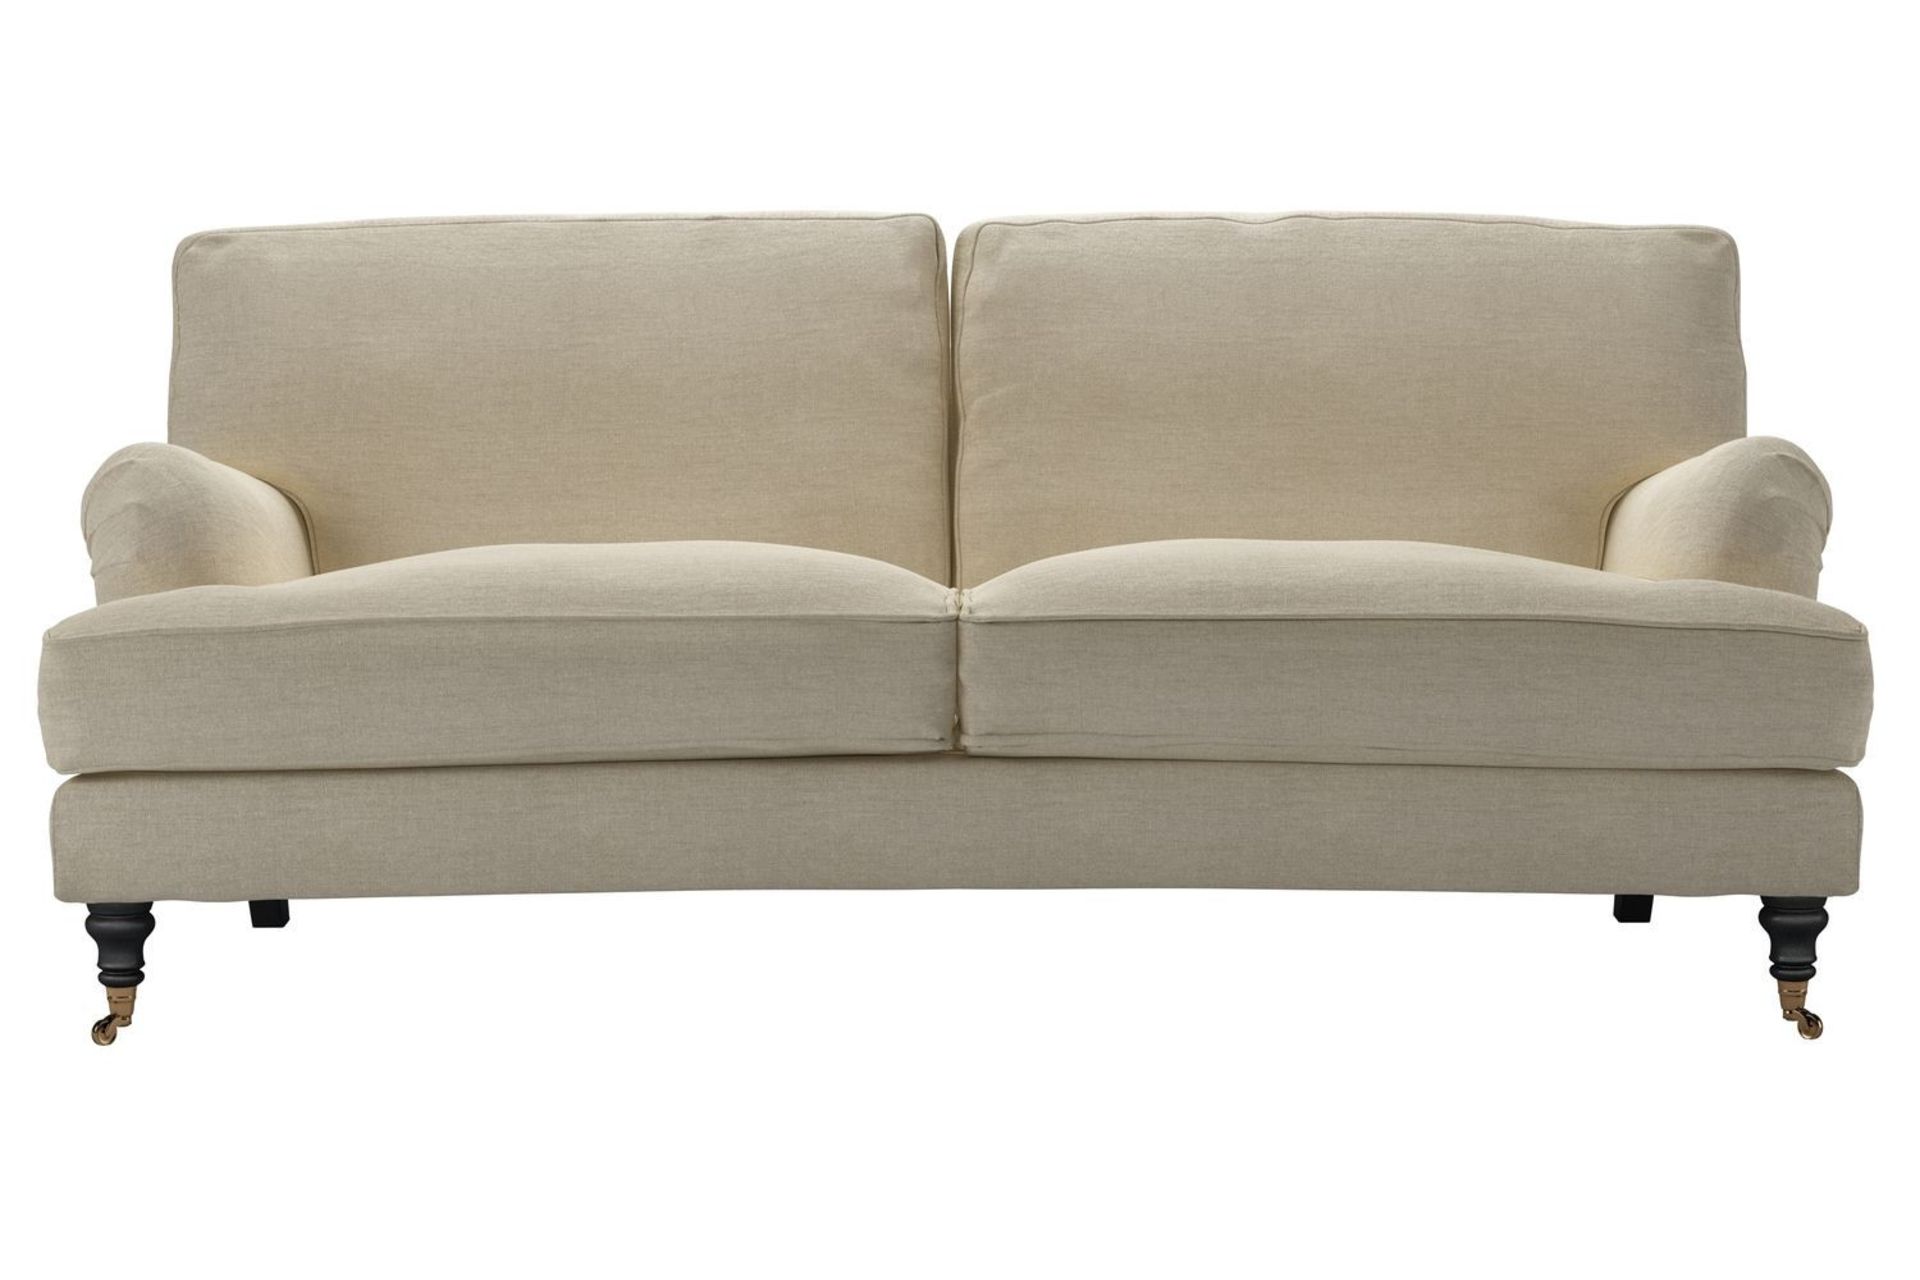 Bluebell 3 Seat Sofa In Pampas Hygge Smart Linen RRP - £2800